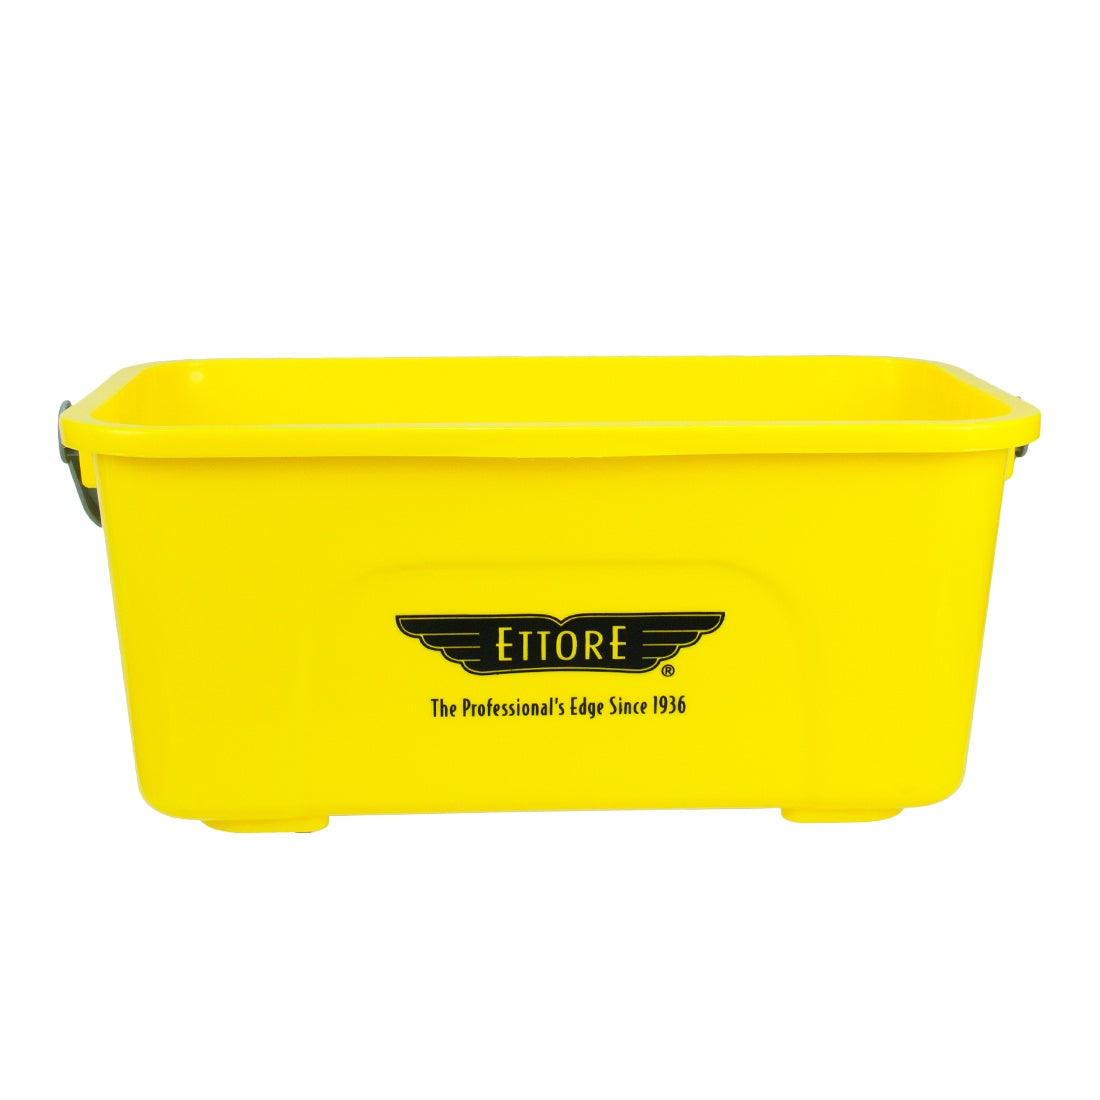 Ettore Compact Super Bucket - Front View